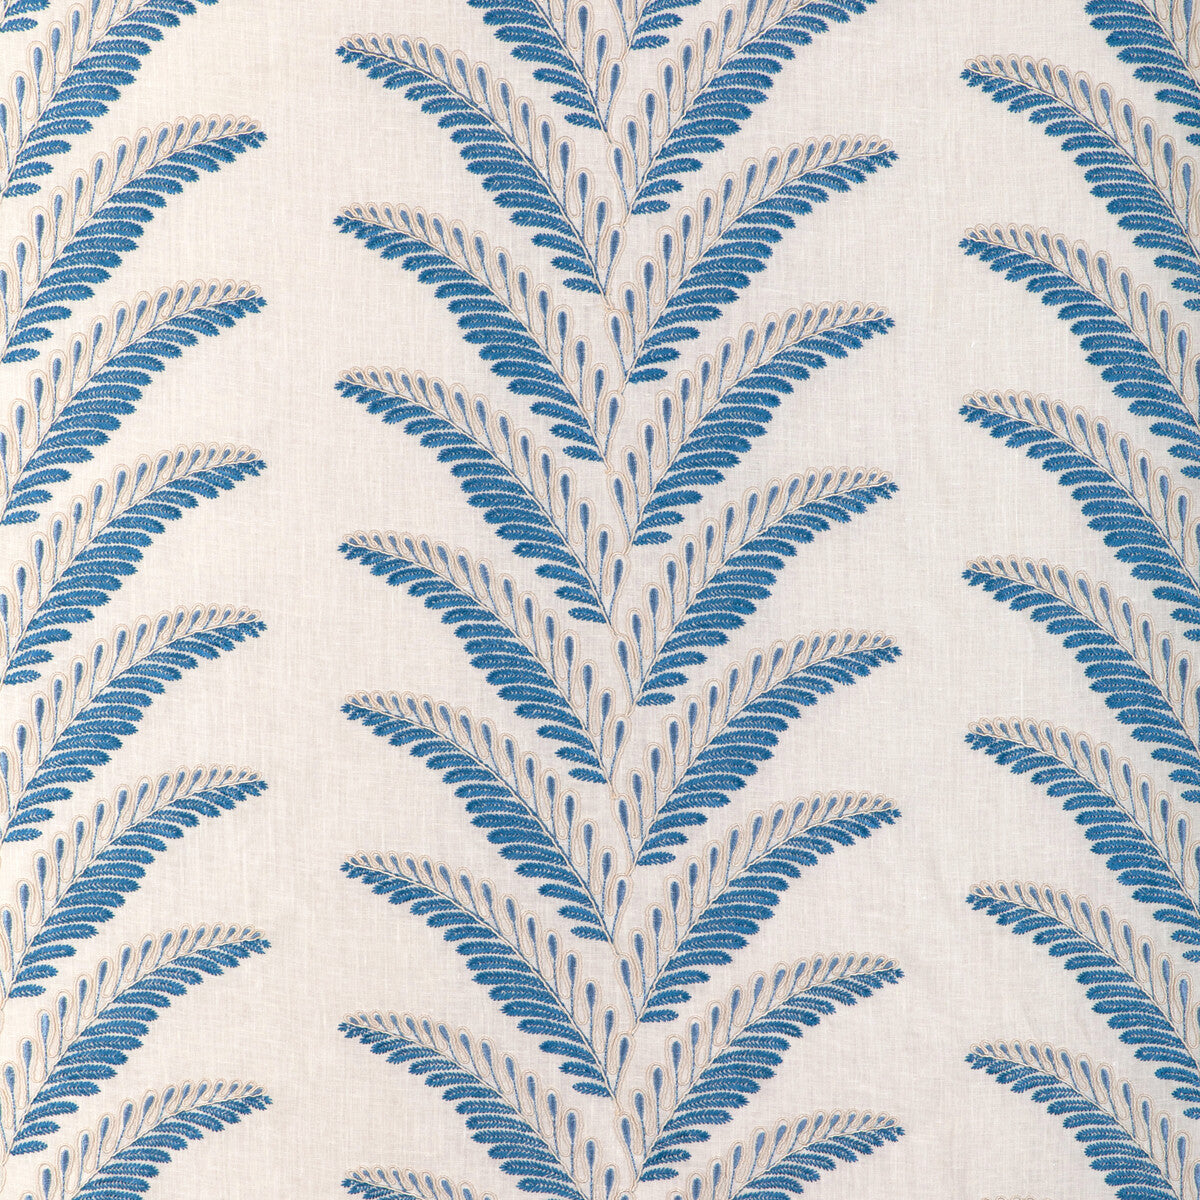 Fougere Emb fabric in blue color - pattern 8024109.51.0 - by Brunschwig &amp; Fils in the La Menagerie collection